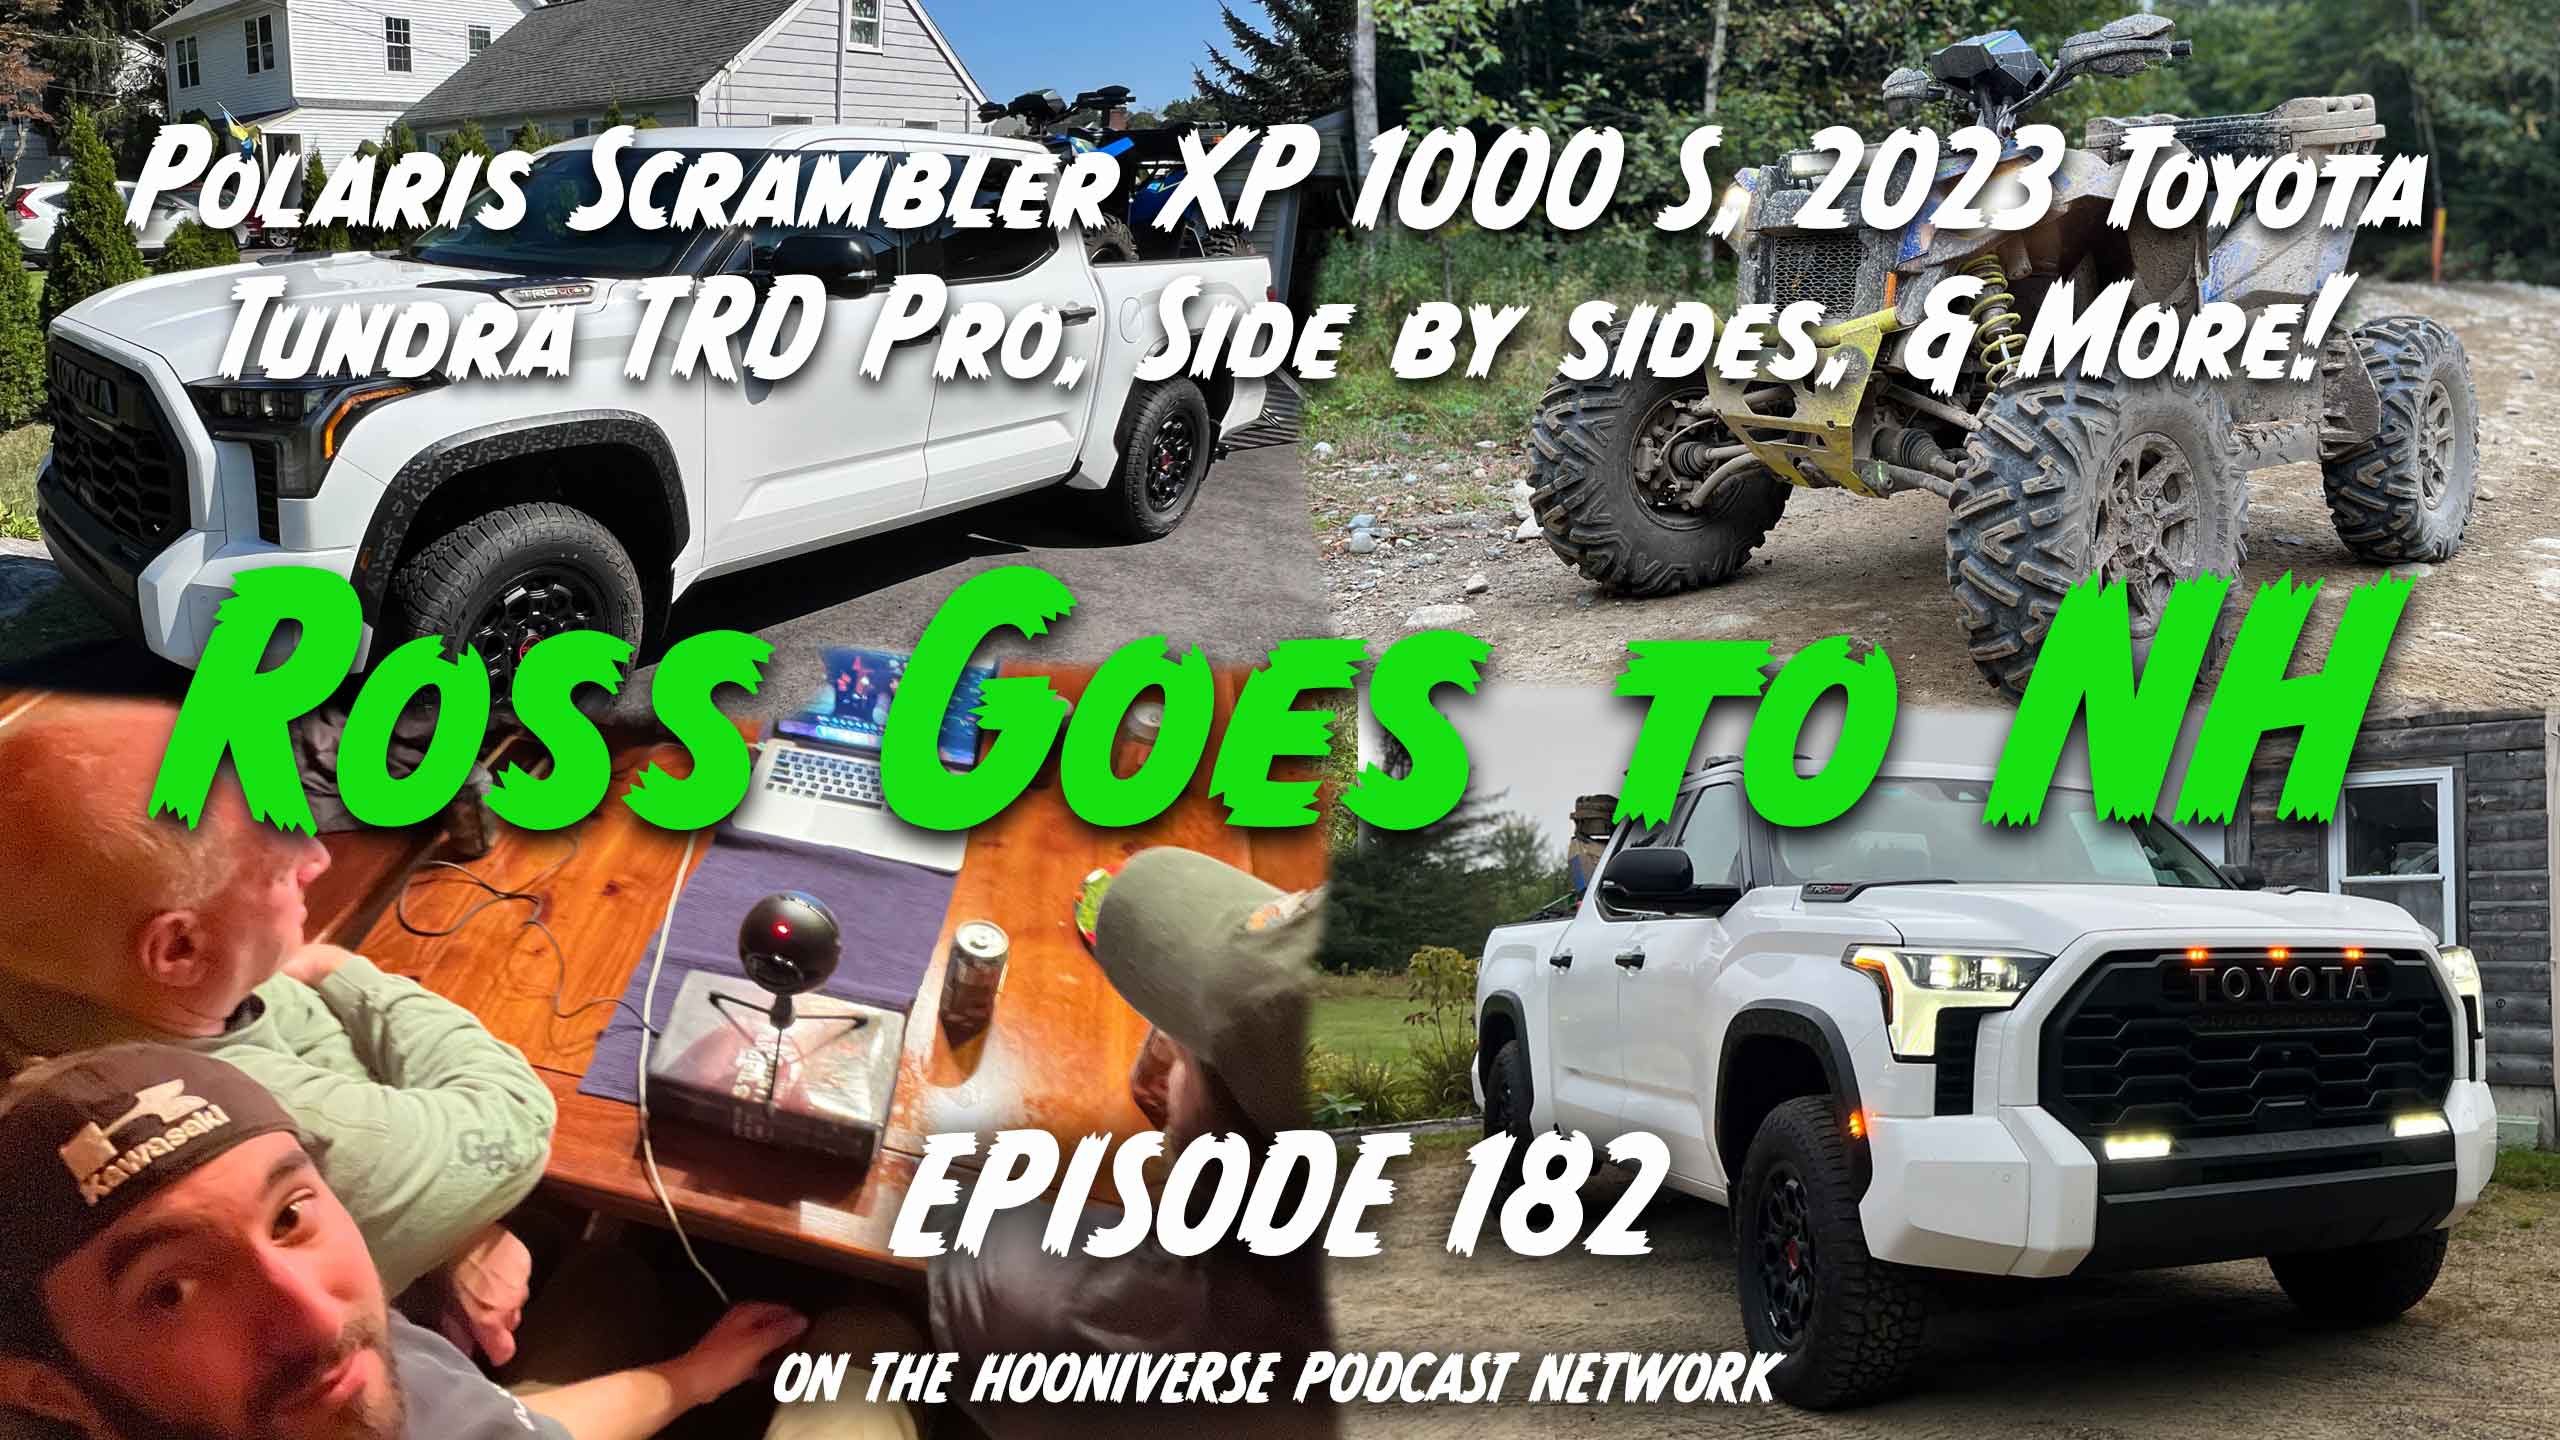 Ross-Goes-To-New-Hampshire-Off-the-Road-Again-Podcast-Episode-182